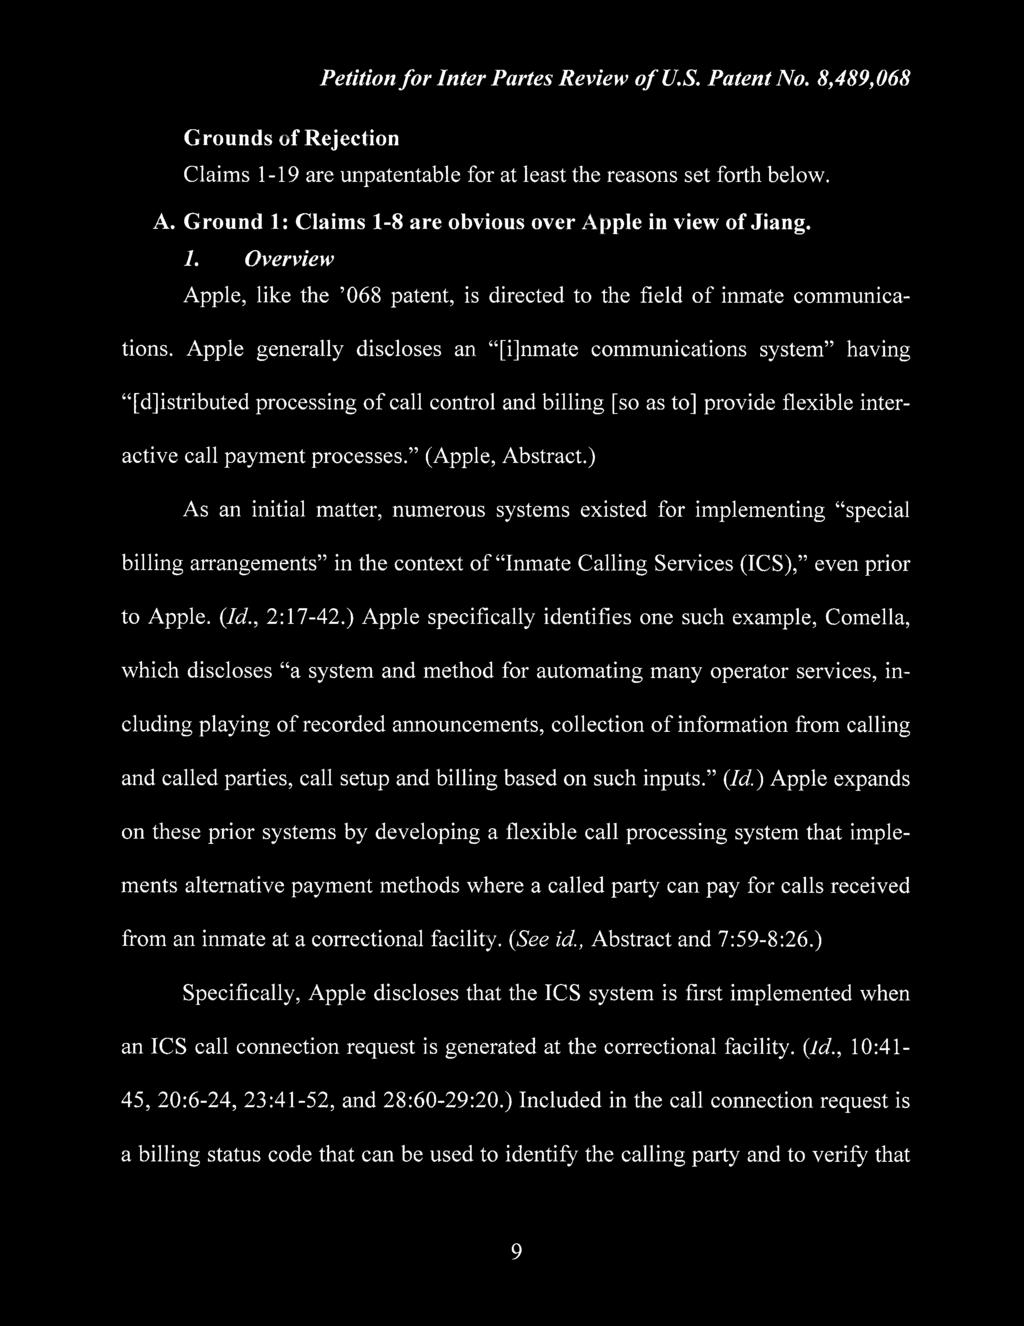 V. Grounds of Rejection Claims 1-19 are unpatentable for at least the reasons set forth below. A. Ground 1: Claims 1-8 are obvious over Apple in view of Jiang. 1. Overview Apple, like the 068 patent, is directed to the field of inmate communications.